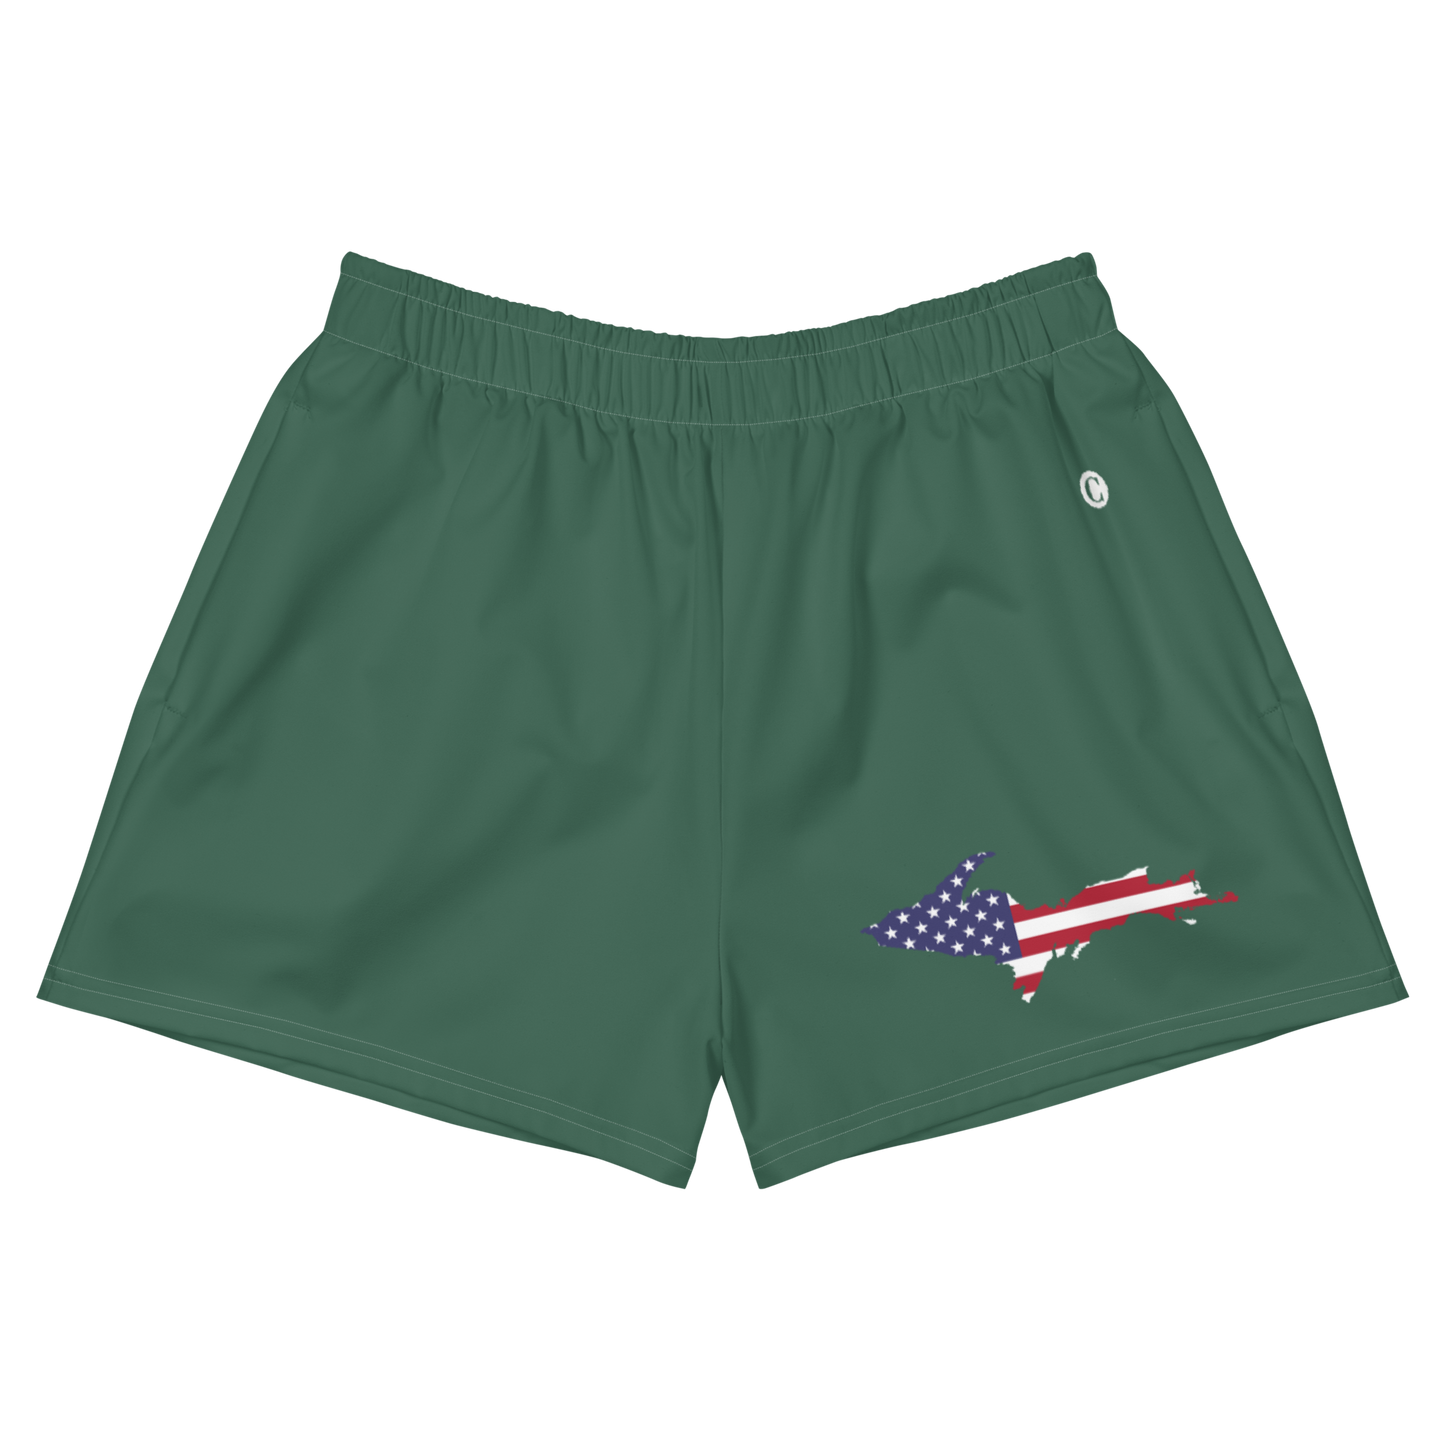 Michigan Upper Peninsula Athletic Shorts (w/ UP USA Flag) | Women's - Ginger Ale Green